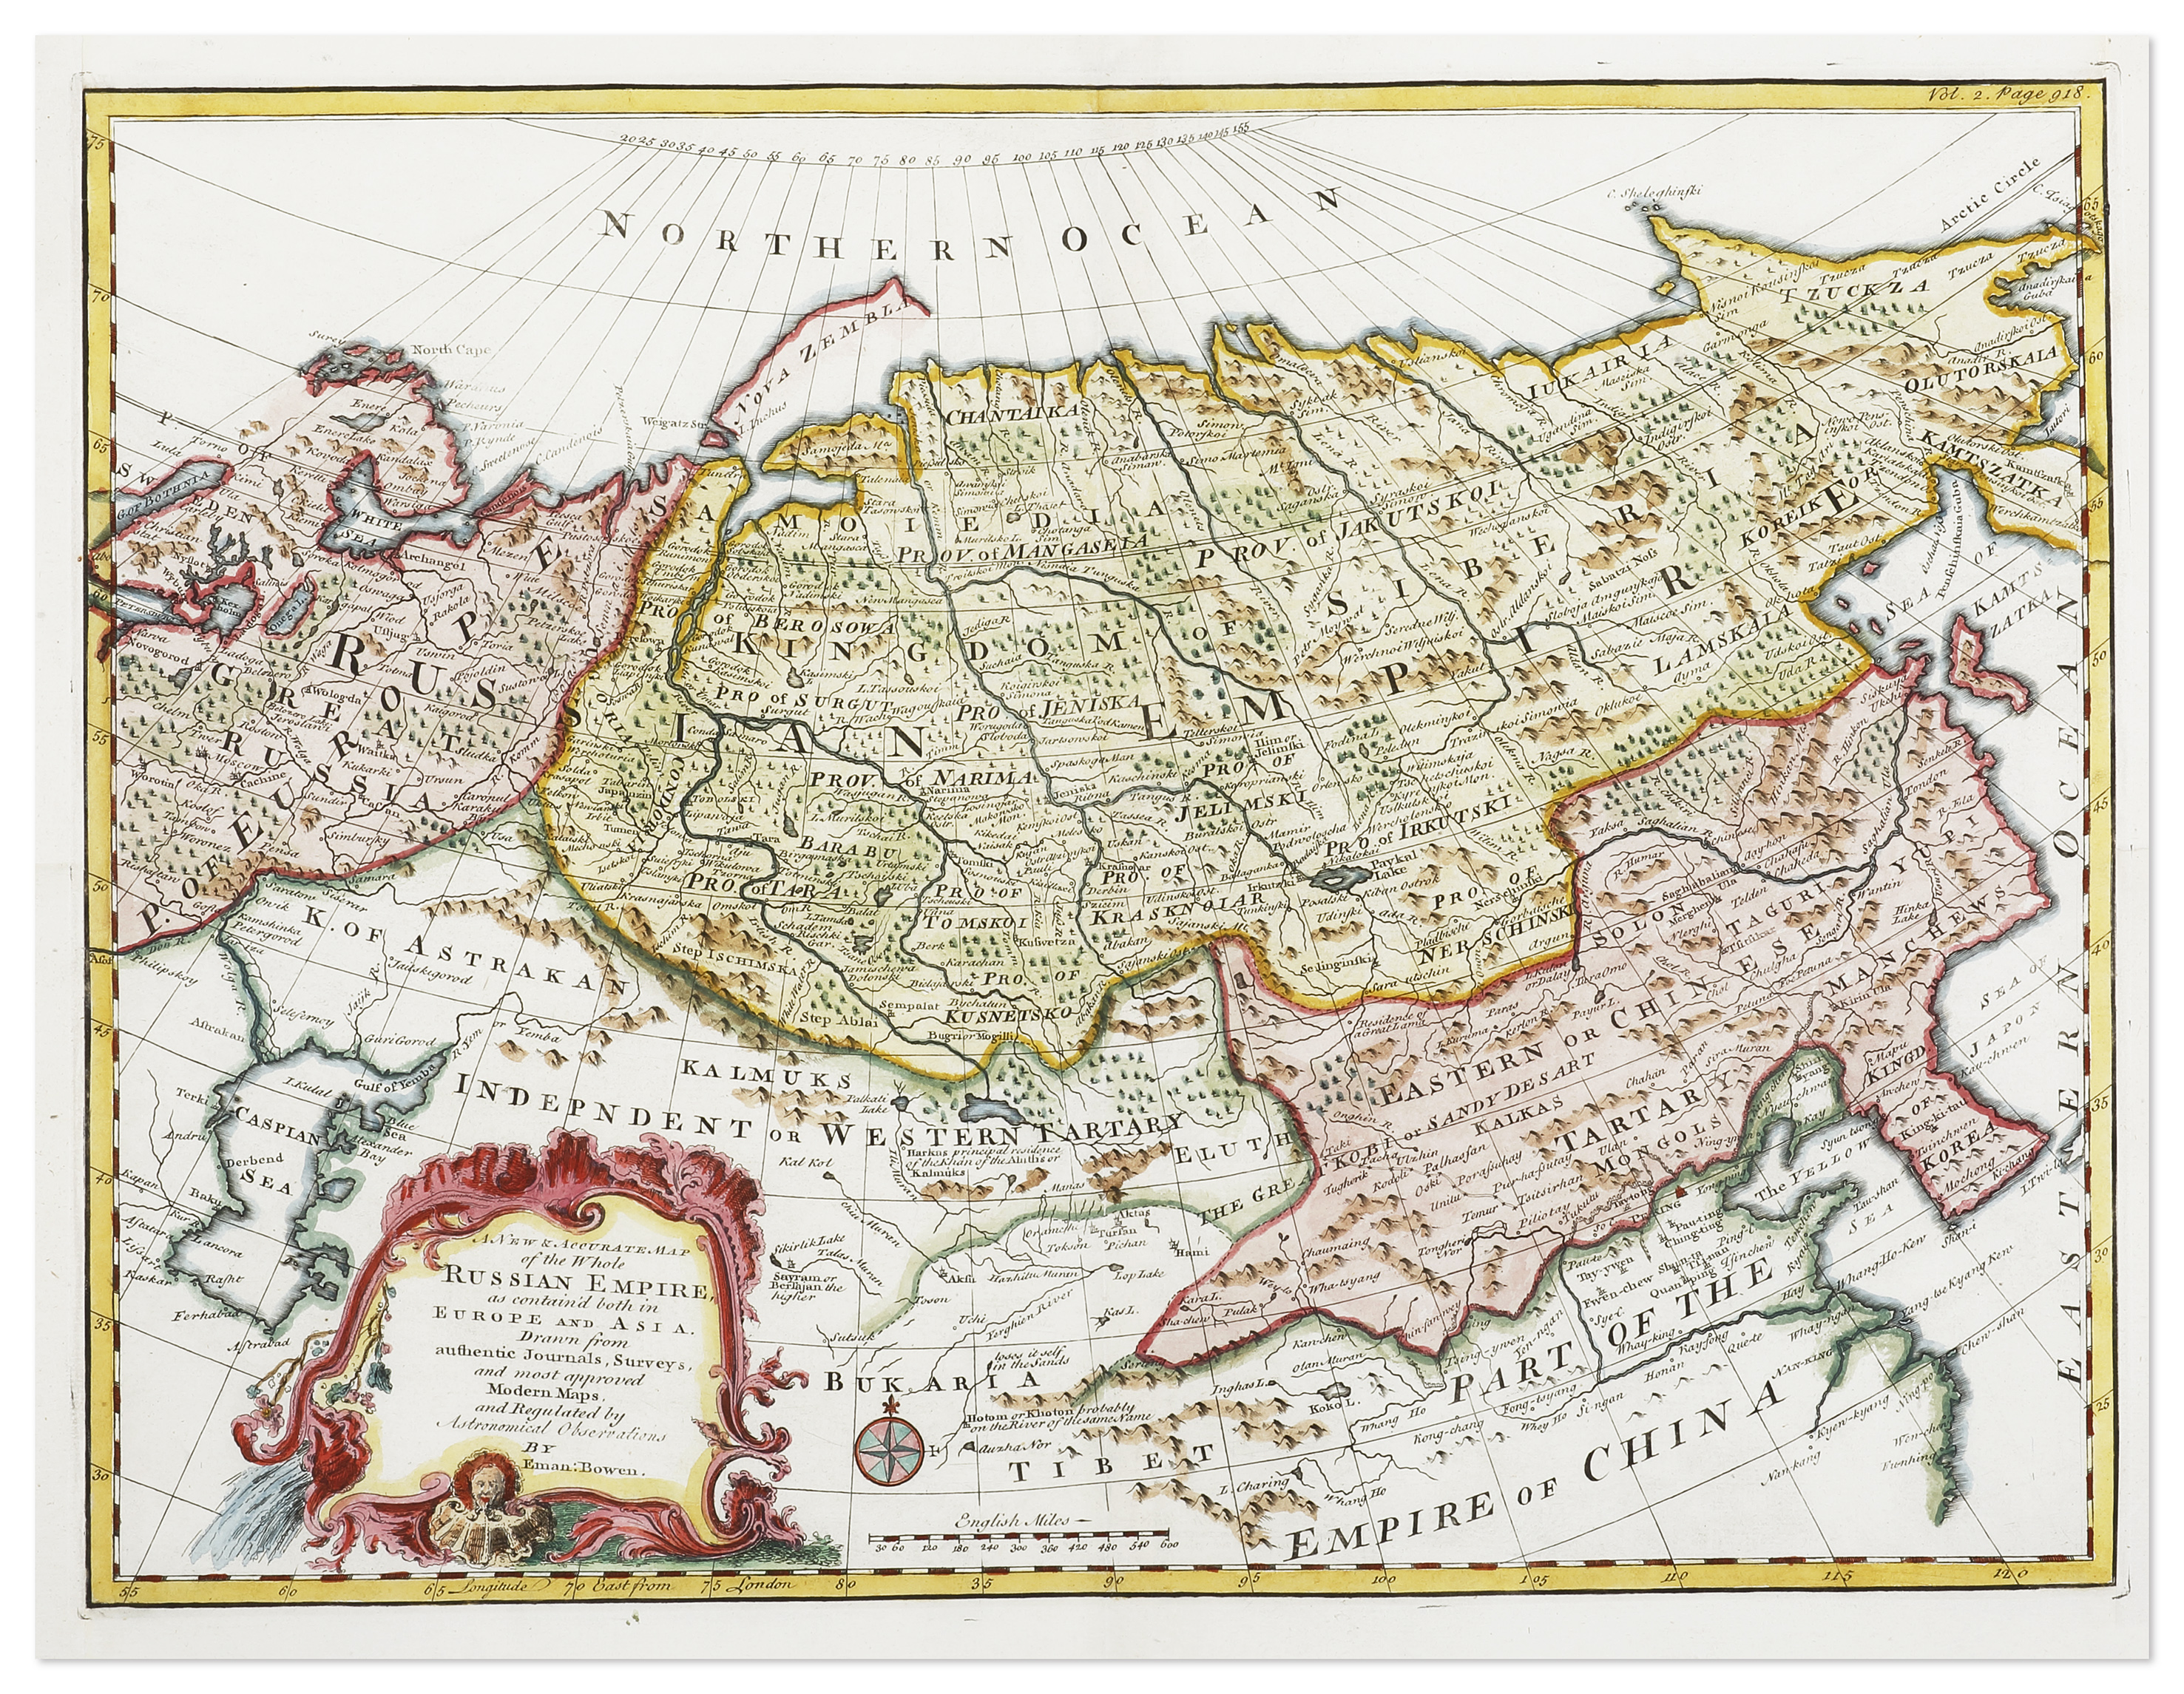 A New  & Accurate Map of the Whole Russian Empire, as Contained both in Europe and Asia...... - Antique Map from 1748